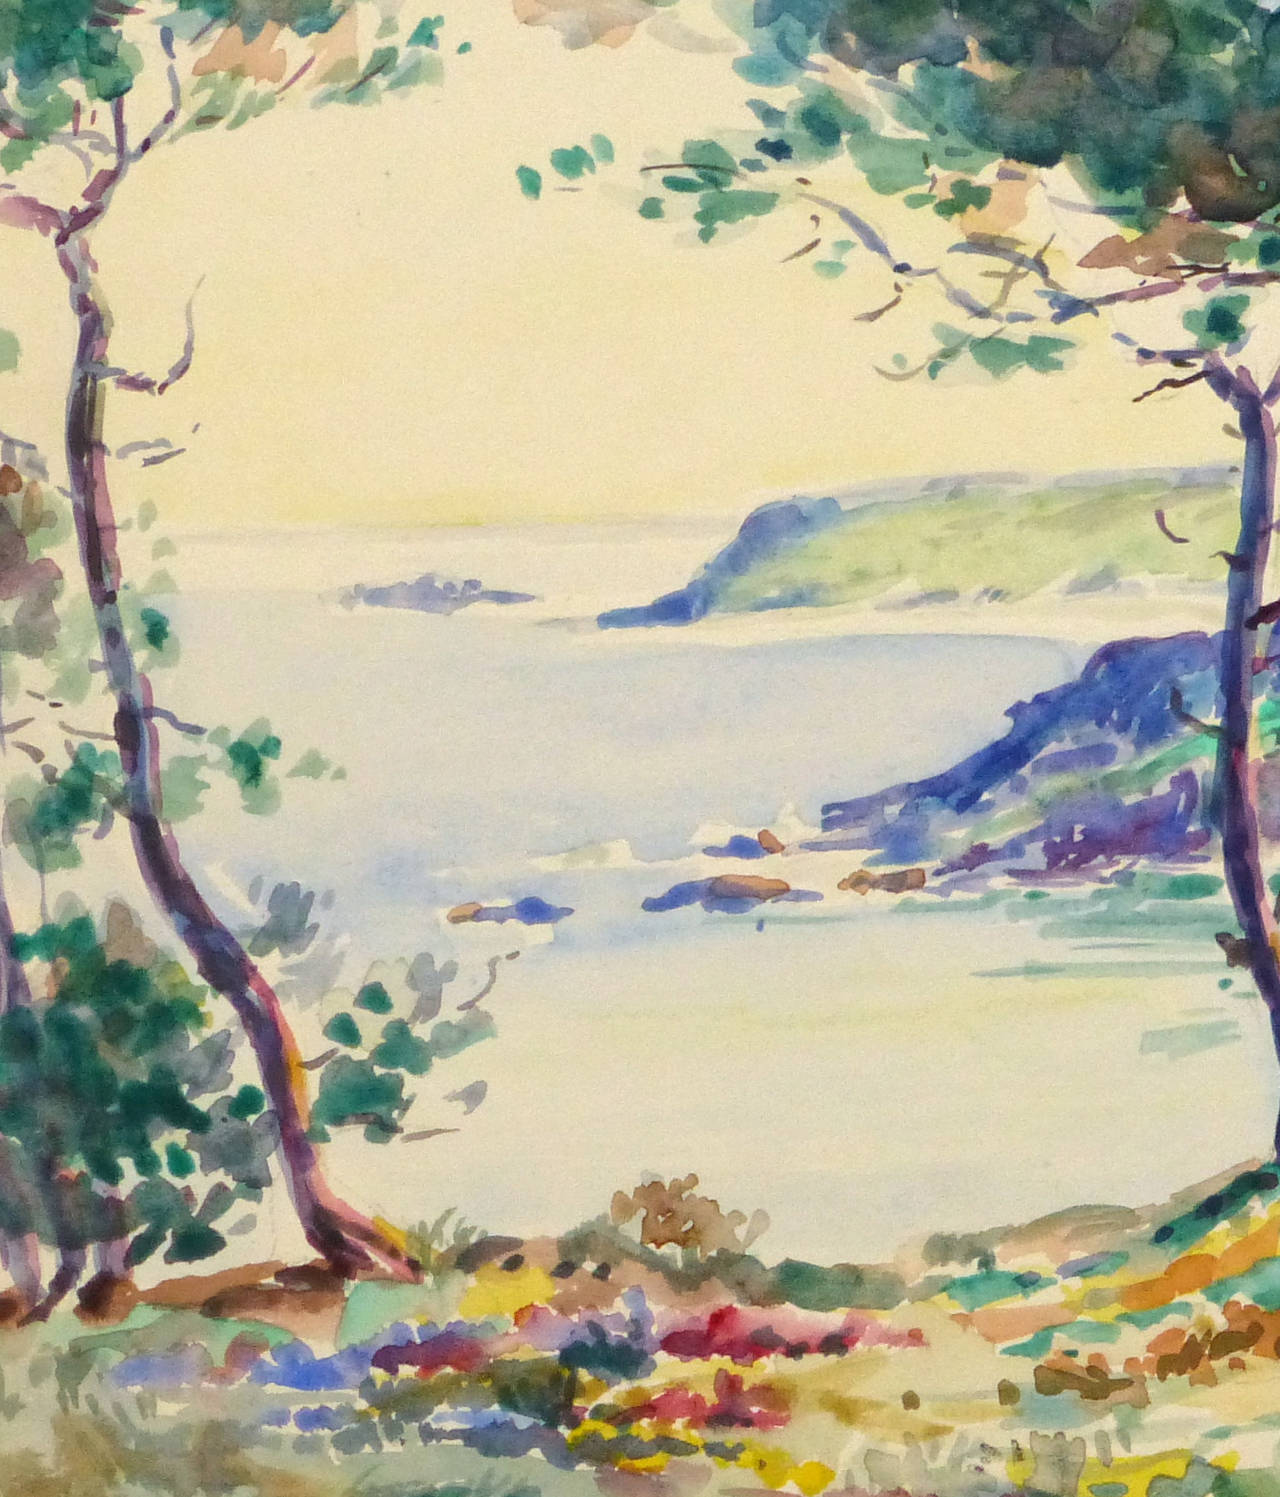 Vintage French Watercolor Landscape - Point of View - Art by Roger Tochon